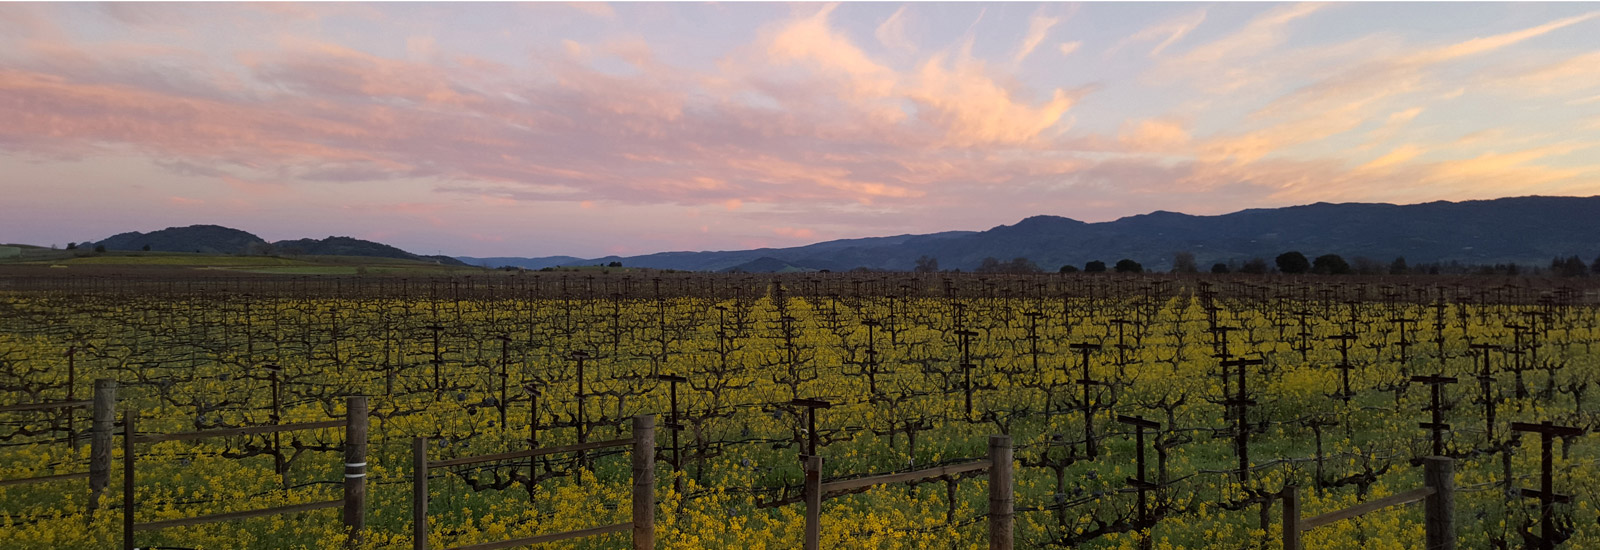 Pink spring sky over dormant grapevines and tiny mustard flowers